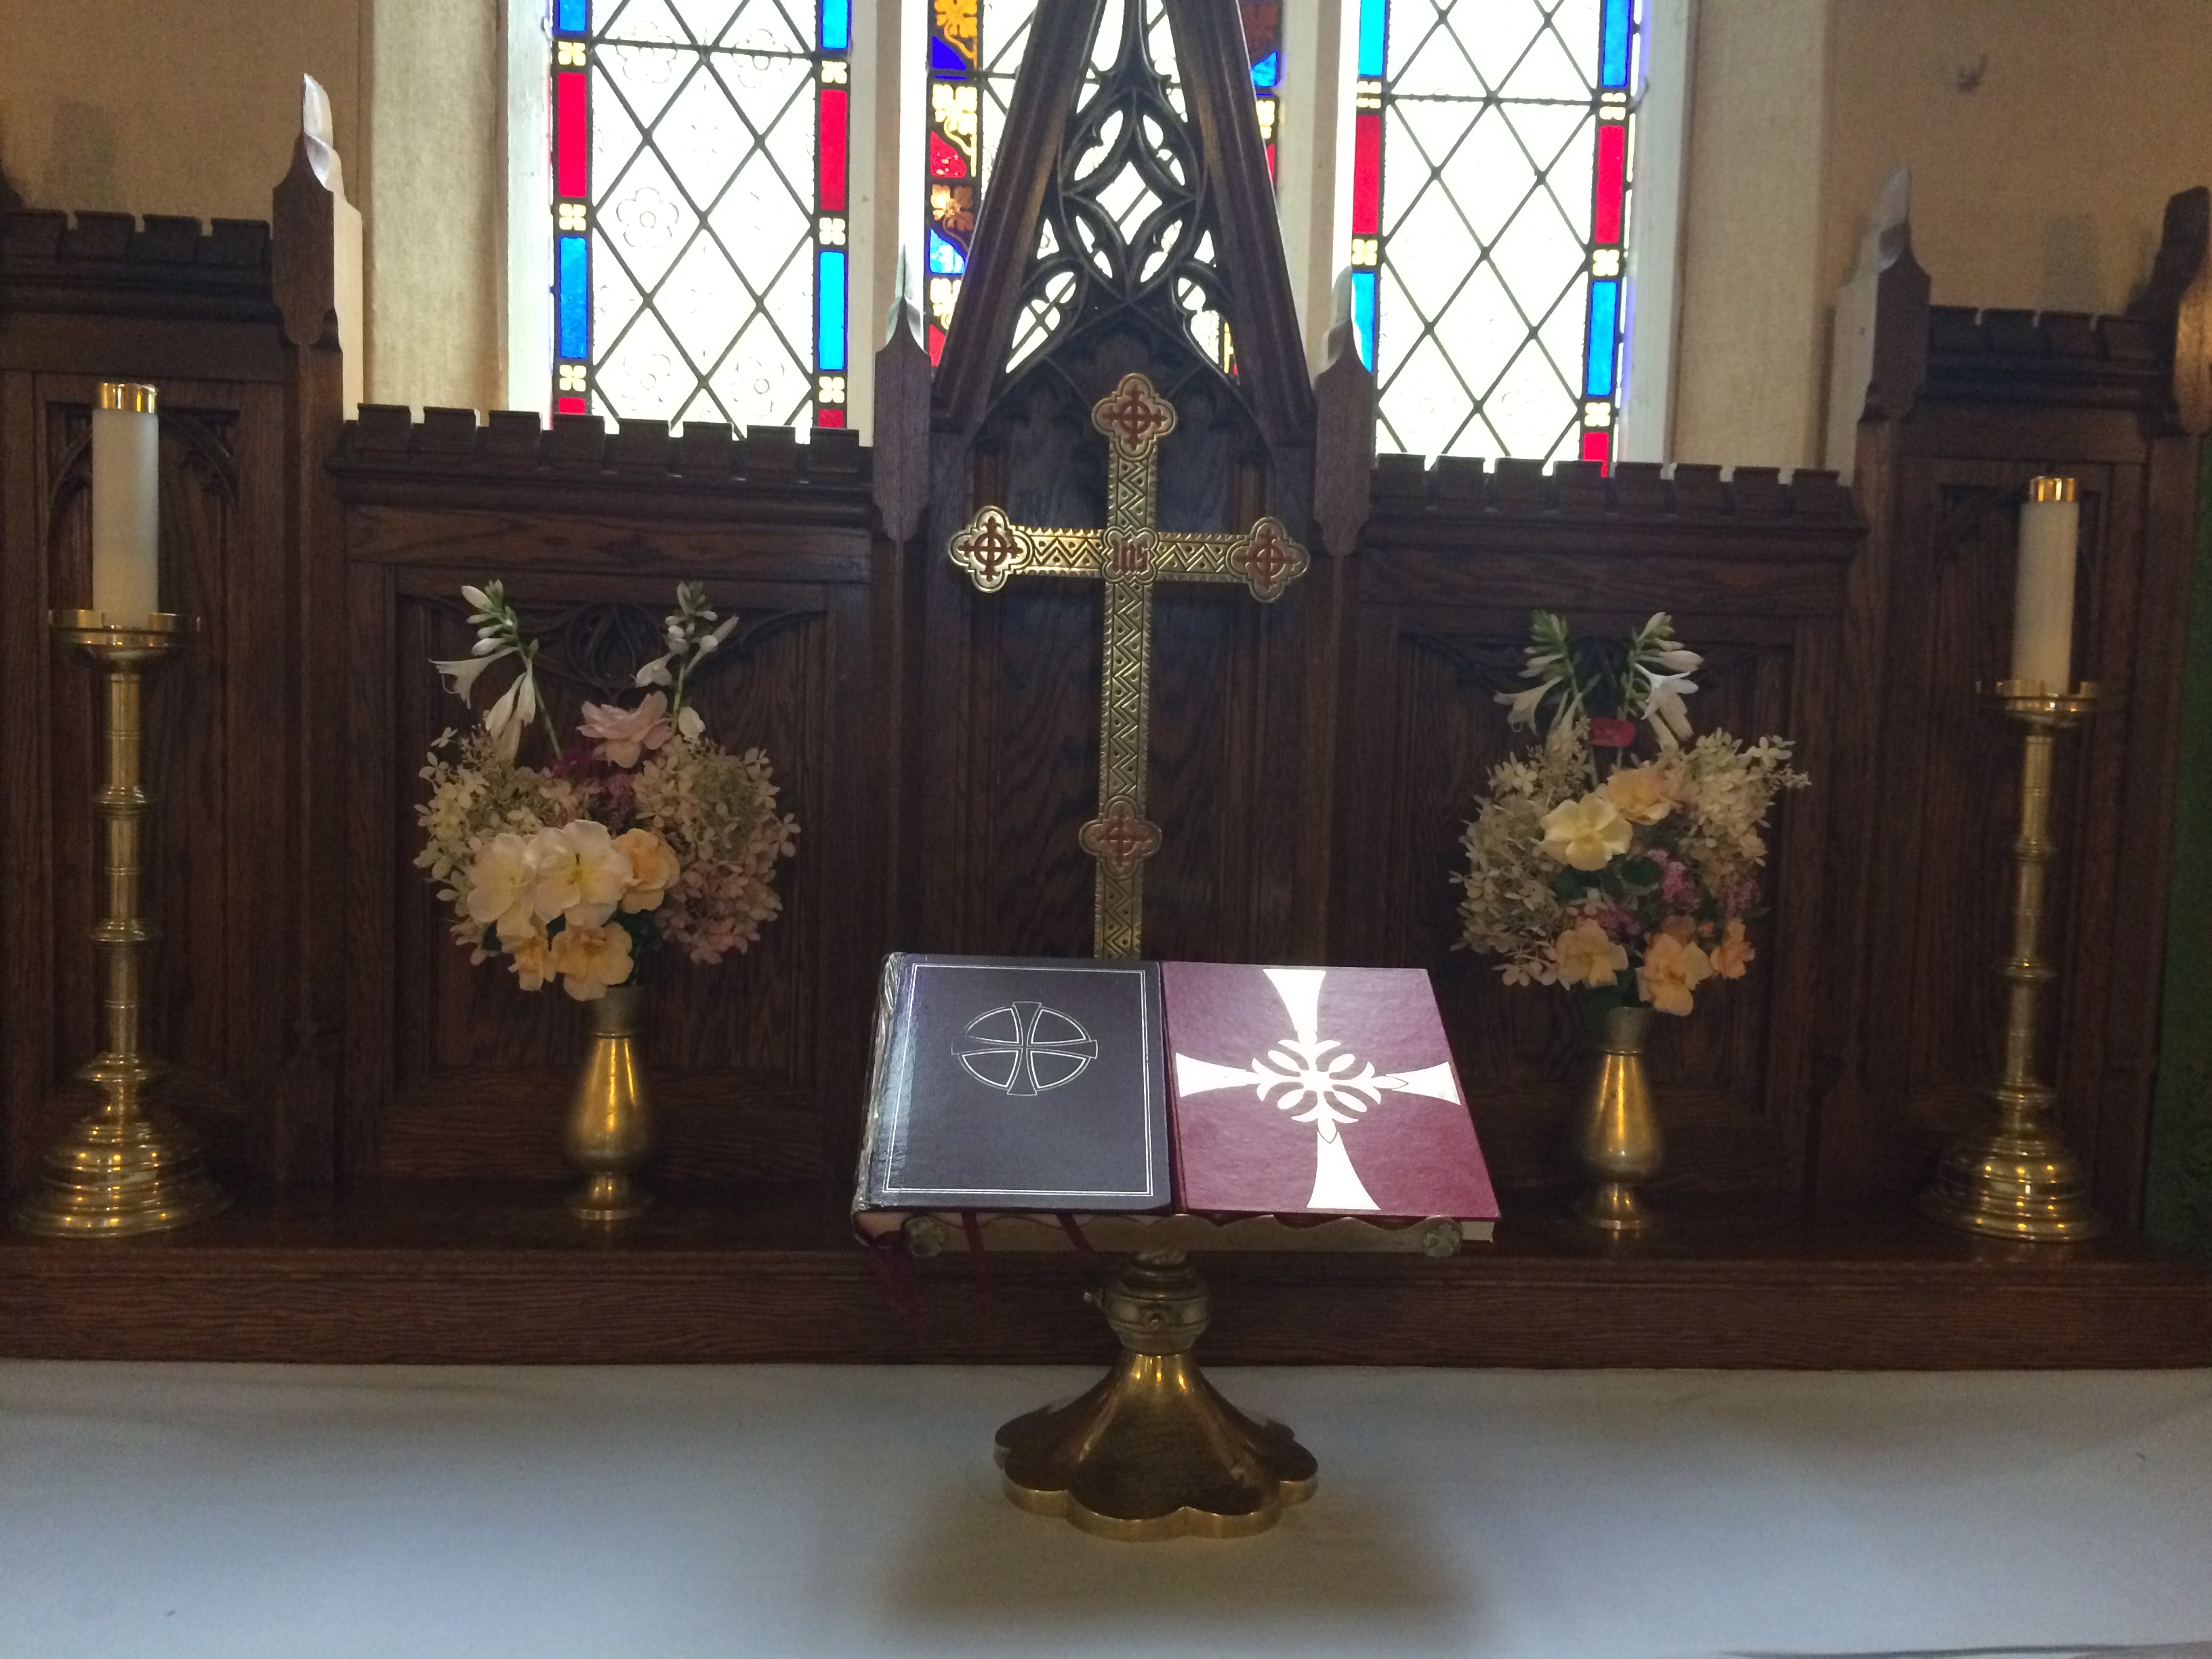 Sunday, August 28th at St. Luke's: Flowers on the Altar.